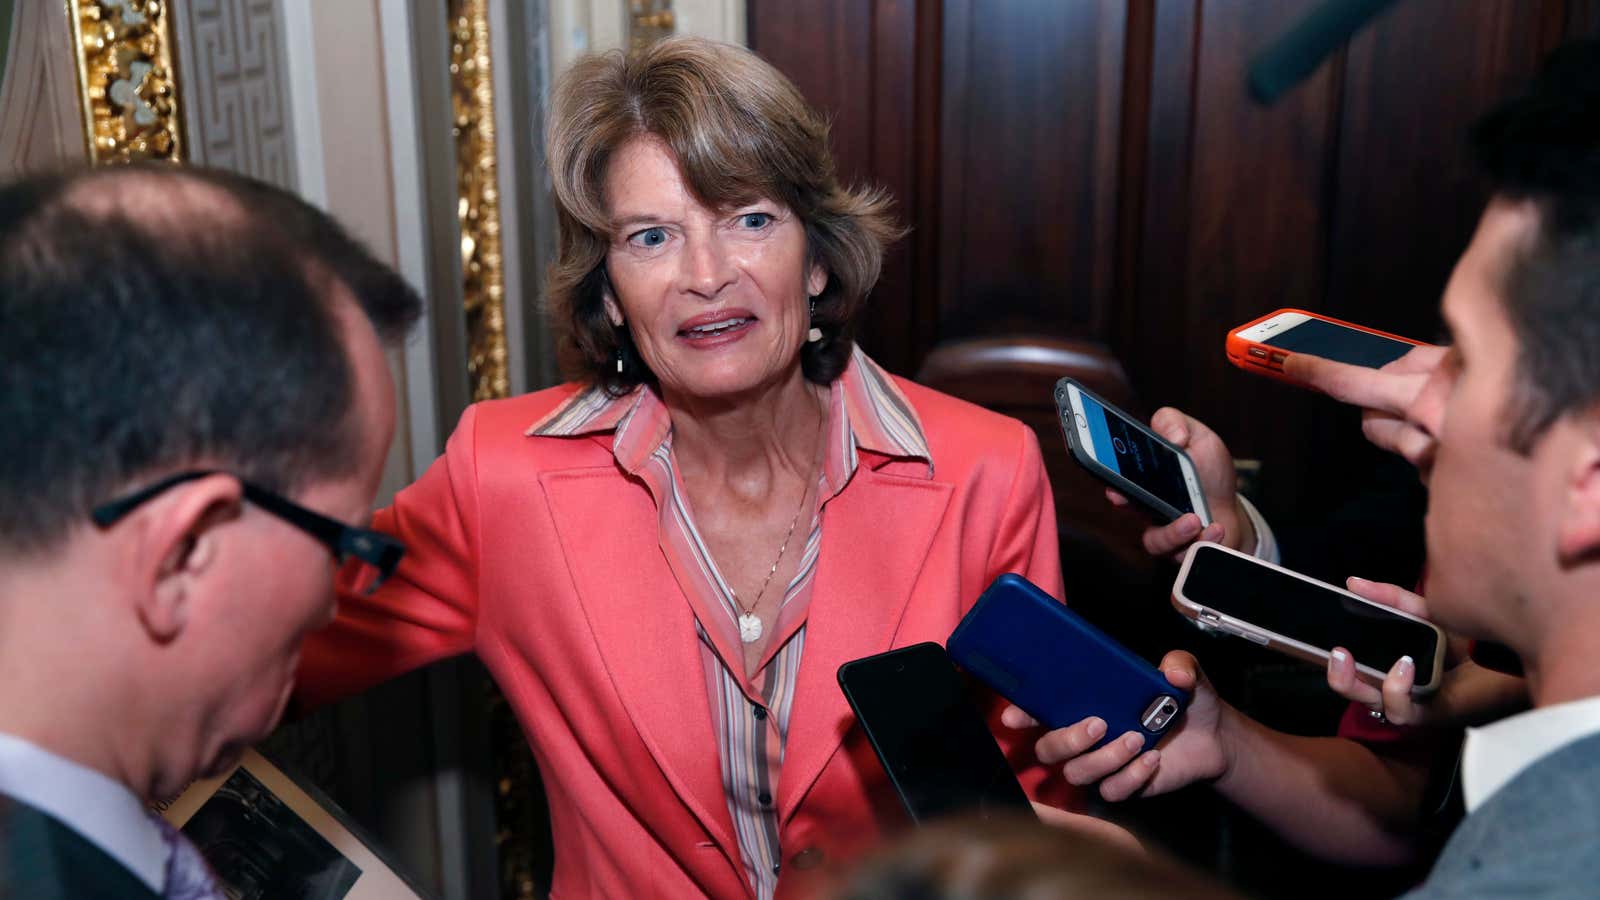 Lisa Murkowski was the only Republican senator to vote against the confirmation.